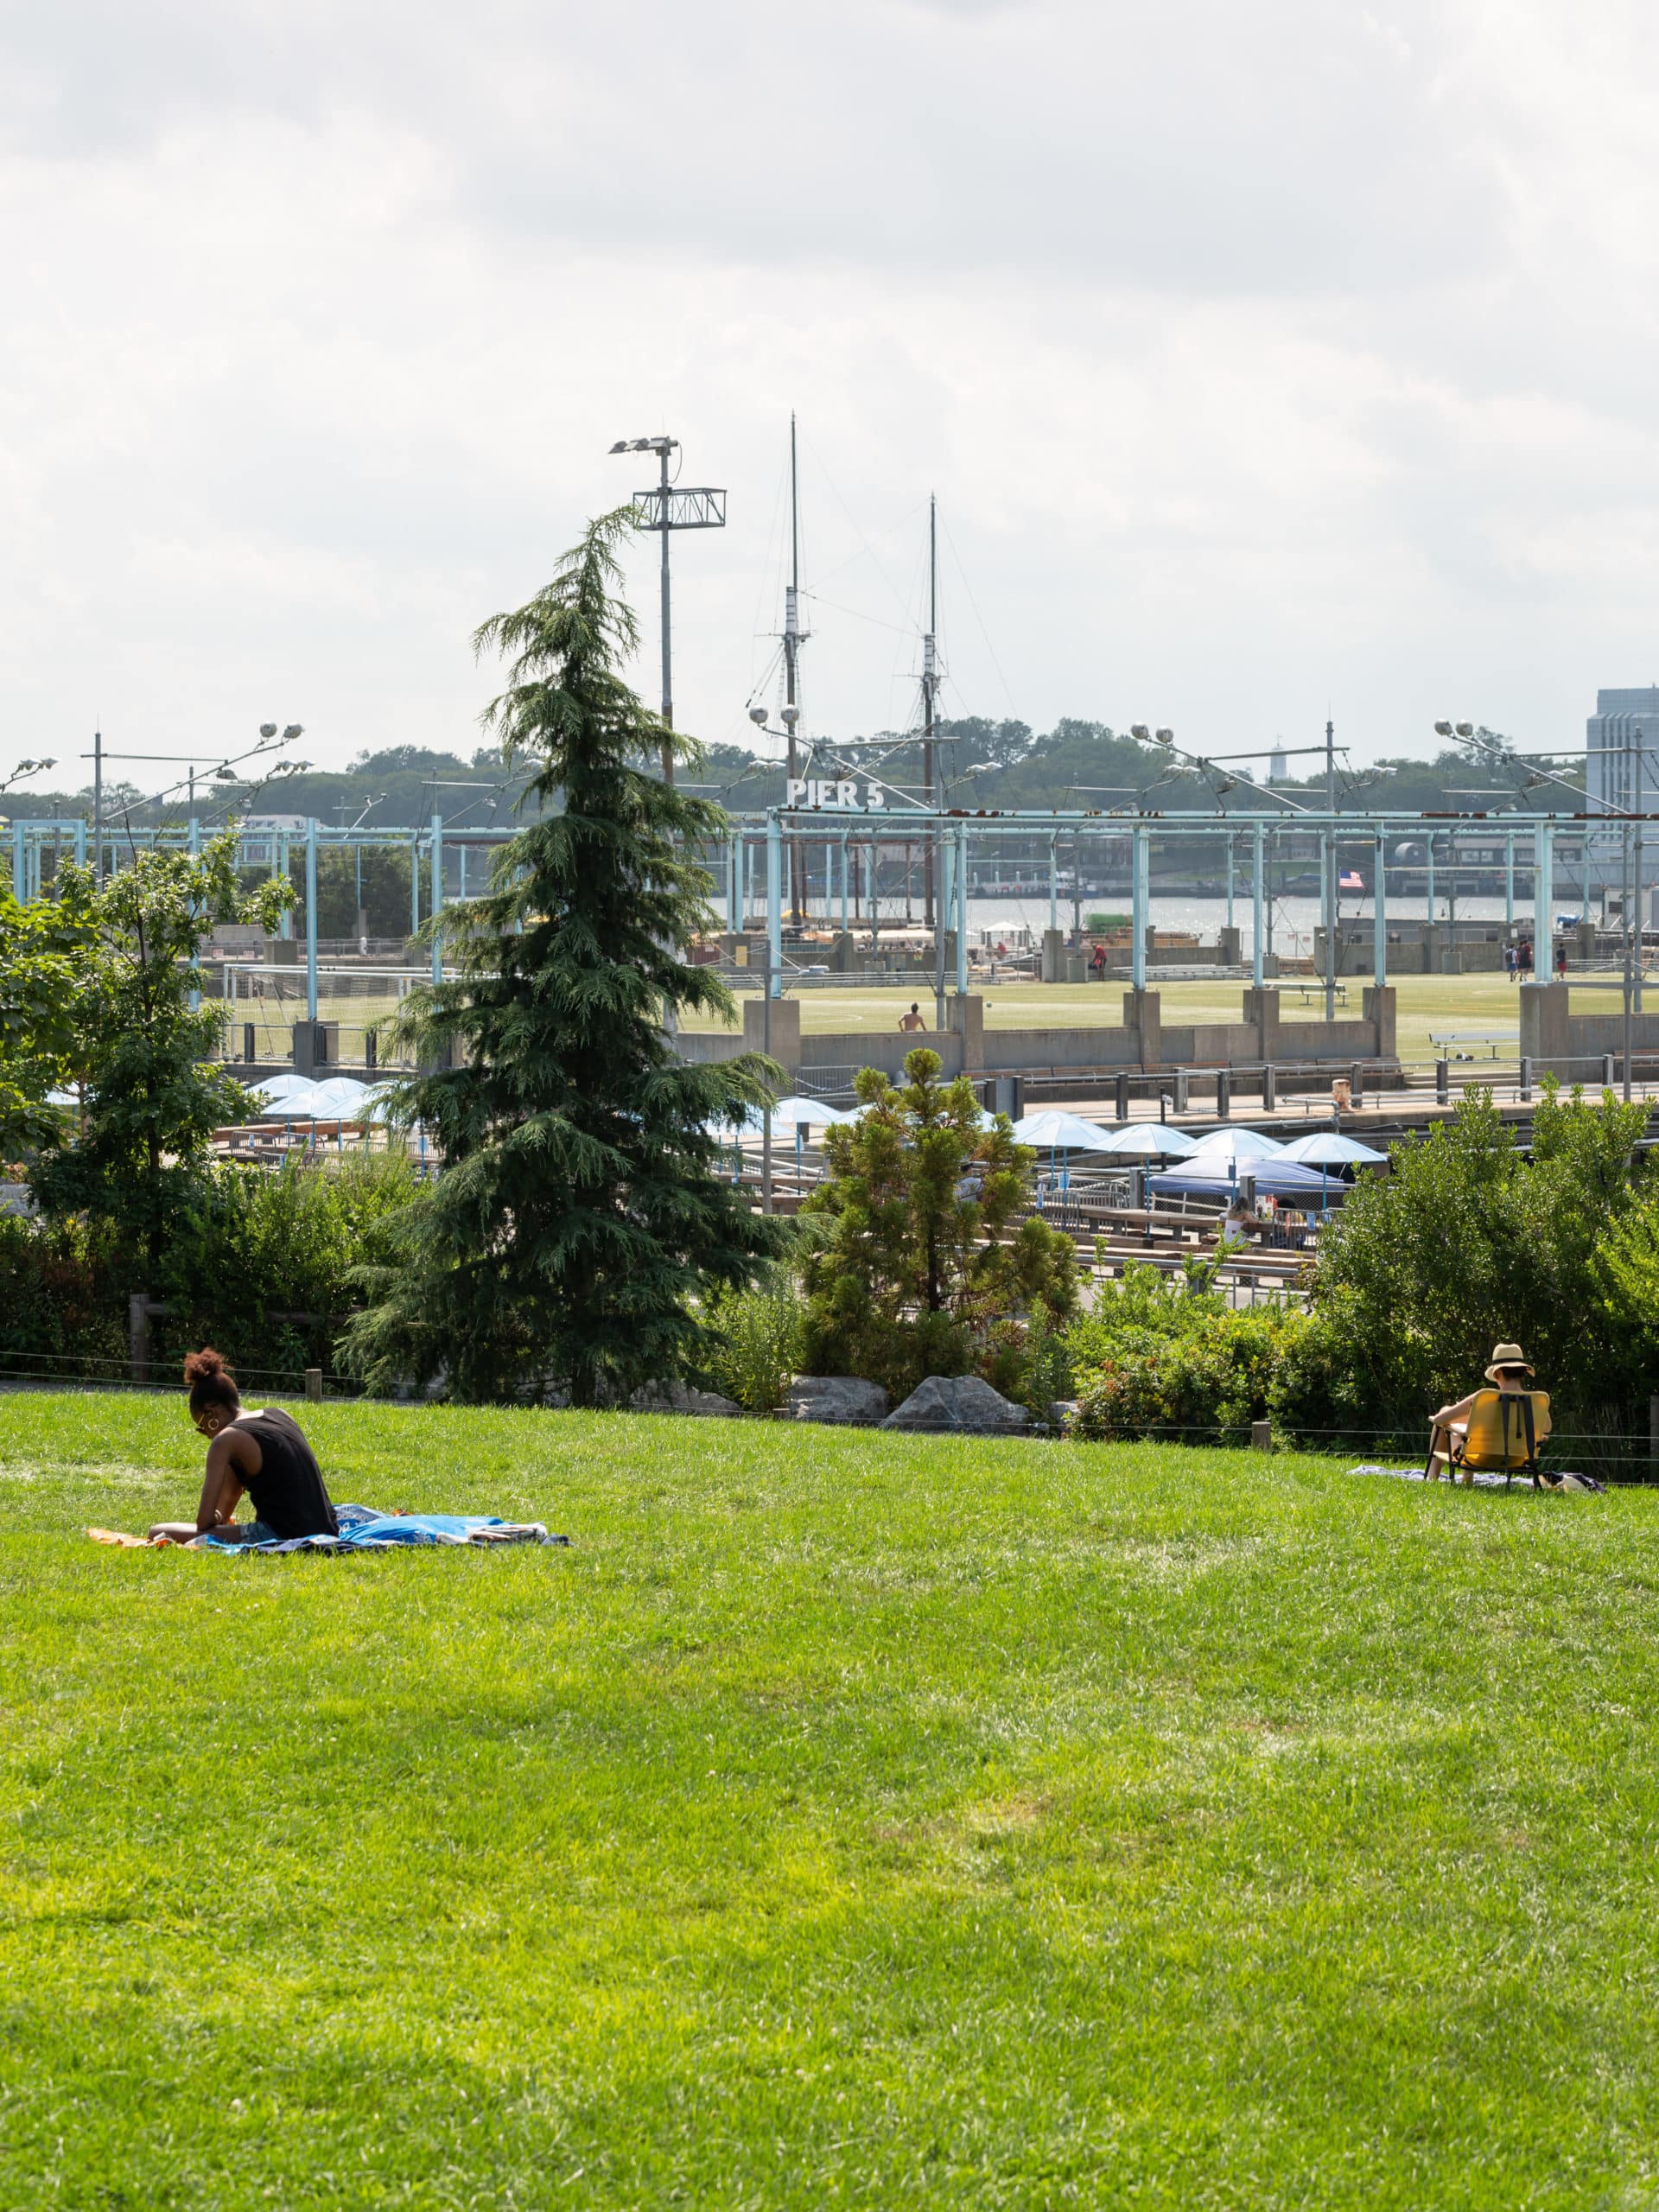 People sitting on the Pier 5 Uplands Lawn on a sunny day with Pier 5 in the background.